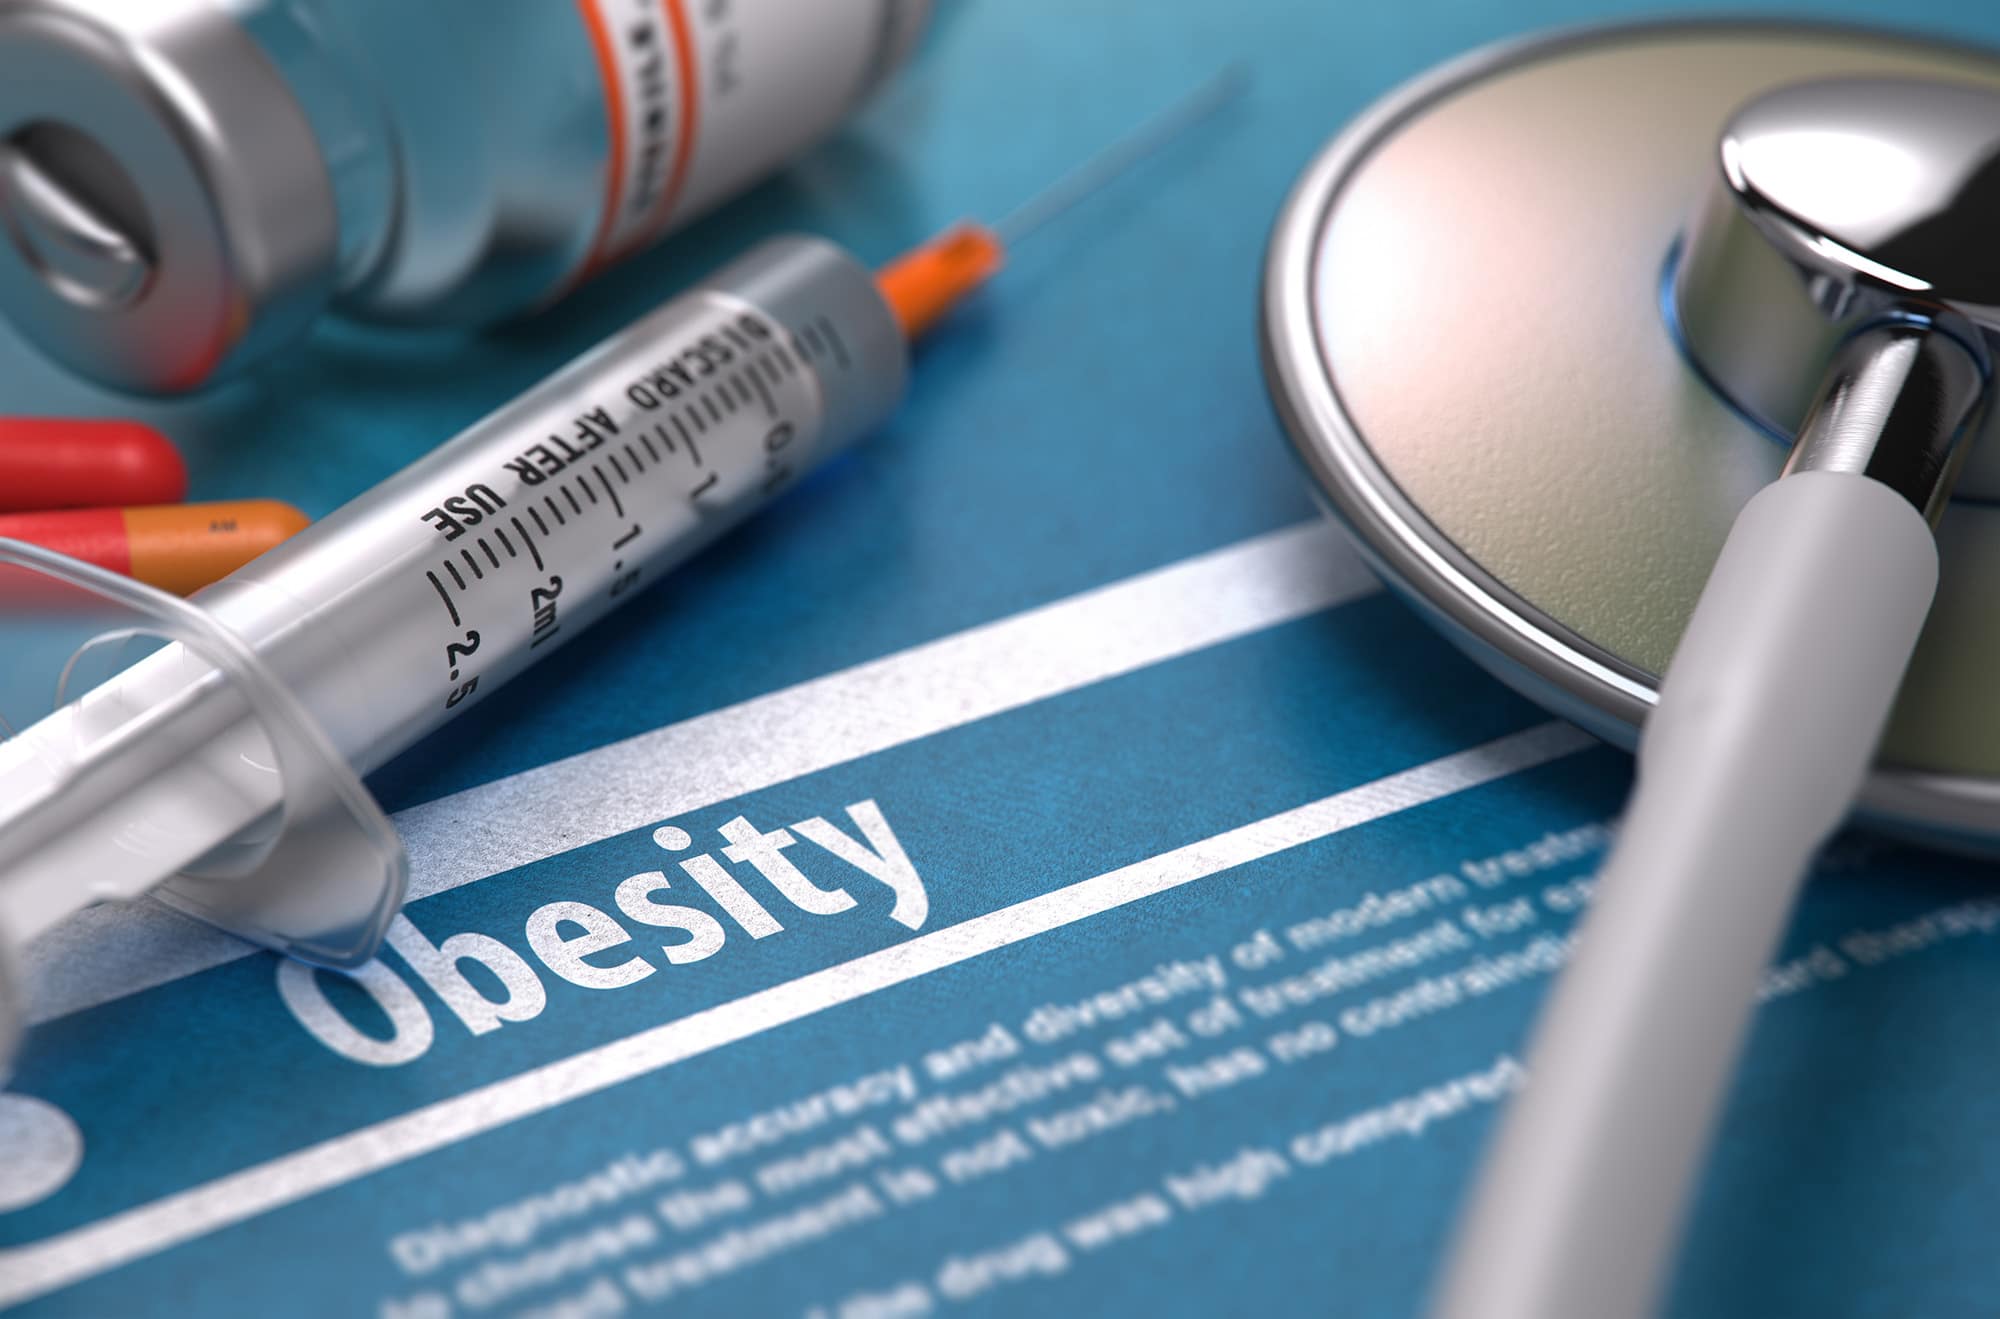 America’s Obesity Epidemic Threatens Effectiveness of Any COVID-19 Vaccine